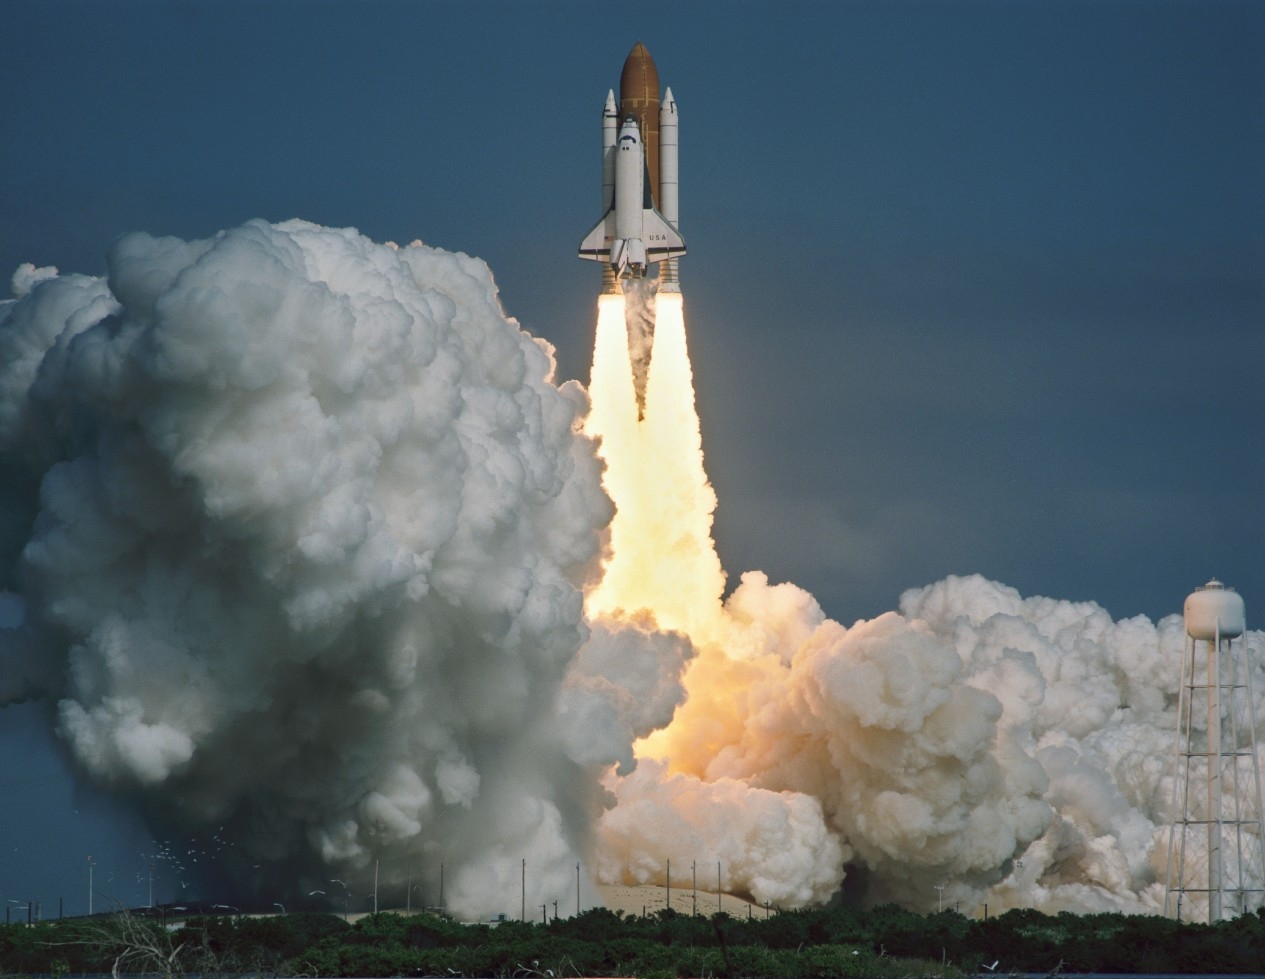 The space shuttle Columbia lifts off from Kennedy Space Center in this 1993 NASA file photo. The crew of Columbia, including Indian astronaut Kalpana Chawla, were killed when the space shuttle broke up on re-entry during a 2003 mission. It was Columbia's 28th mission. (NASA)